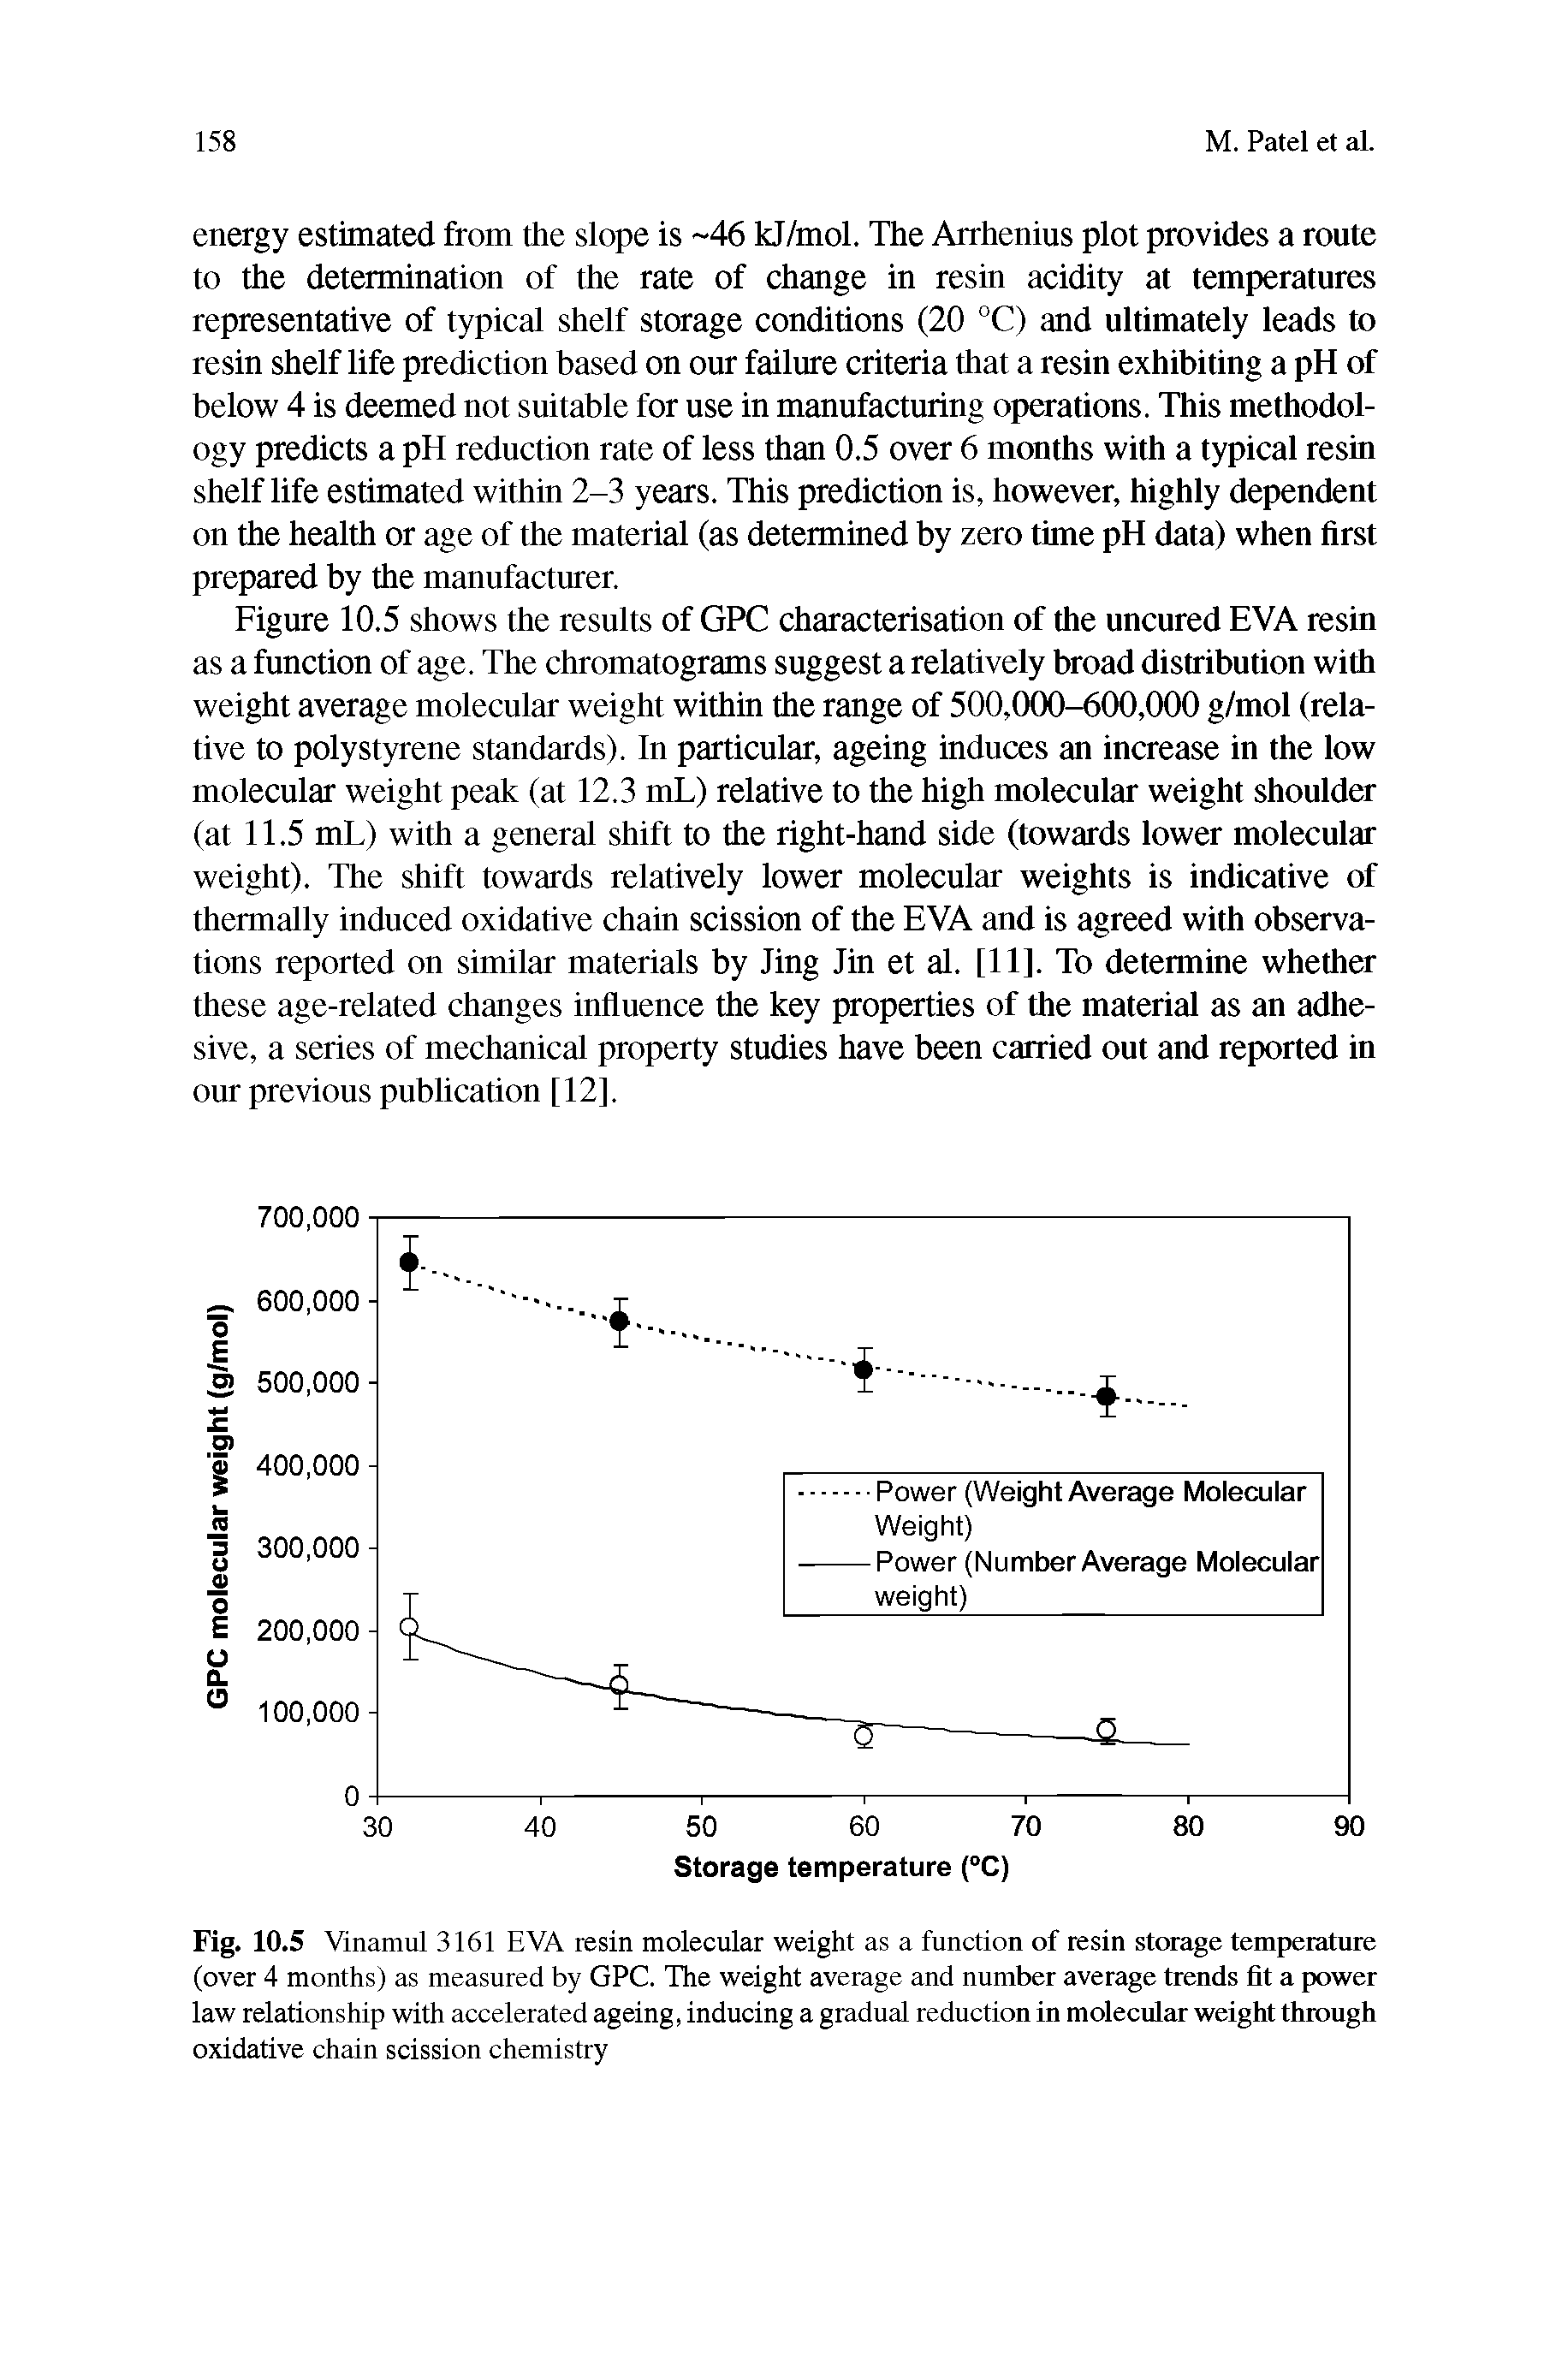 Fig. 10.5 Vinamul 3161 EVA resin molecular weight as a function of resin storage temperature (over 4 months) as measured by GPC. The weight average and number average trends fit a power law relationship with accelerated ageing, inducing a gradual reduction in molecular weight through oxidative chain scission chemistry...